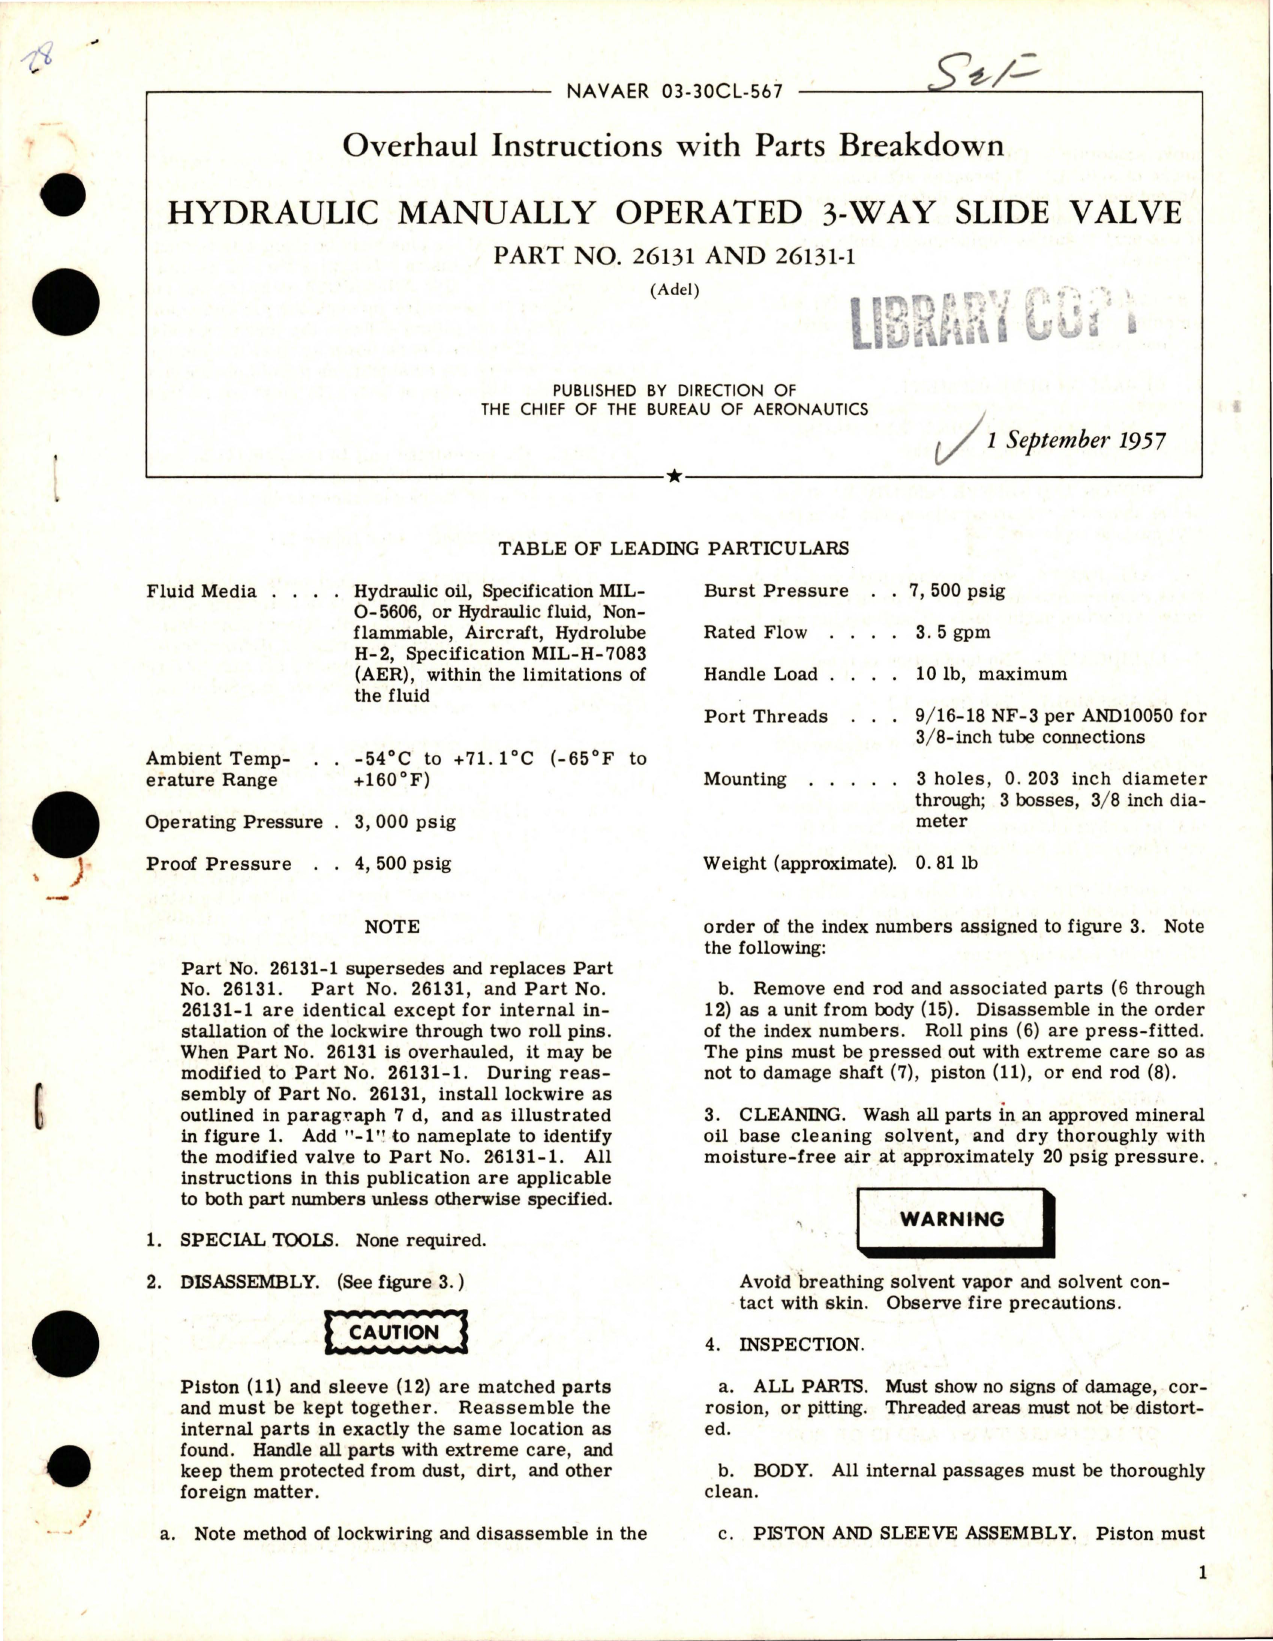 Sample page 1 from AirCorps Library document: Overhaul Instructions with Parts for Manually Operated Hydraulic 3-Way Slide Valve - Parts 26131 and 26131-1 